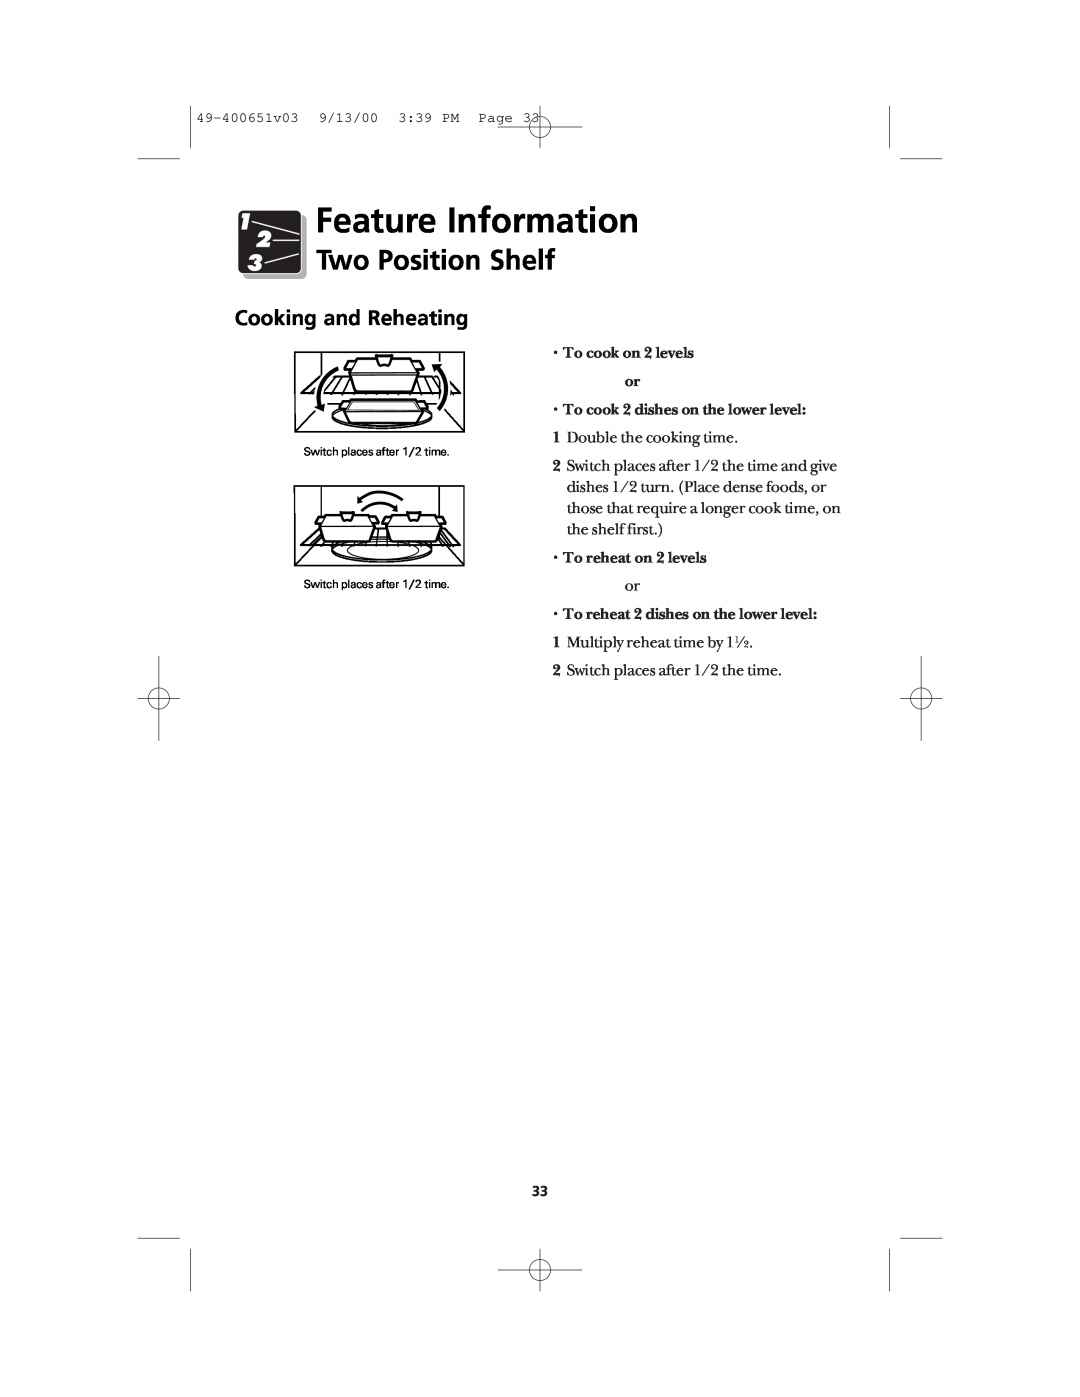 Frigidaire FMT148 warranty Cooking and Reheating, Feature Information, Two Position Shelf 